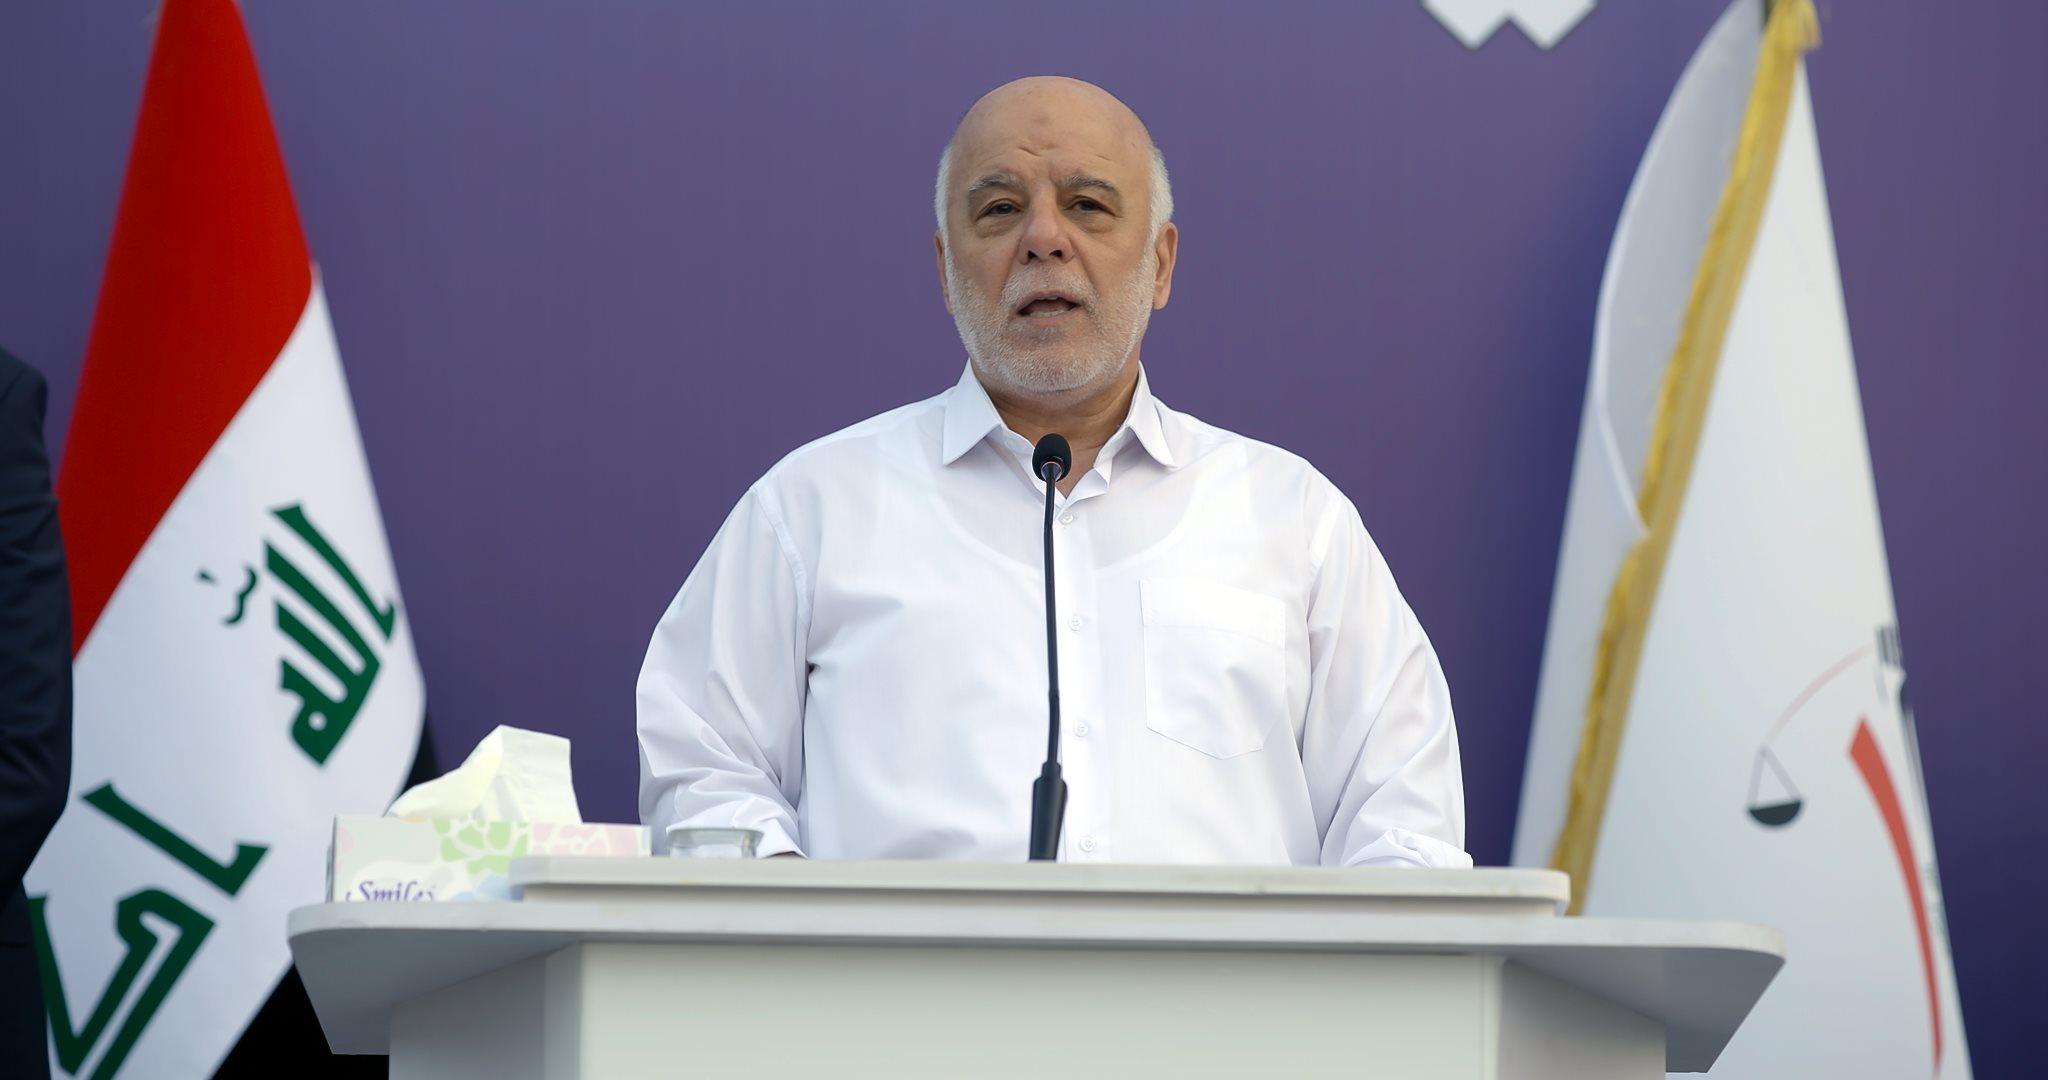 Dr. Al-Abadi: The battle of Iraq today is the battle of the state versus the non-state